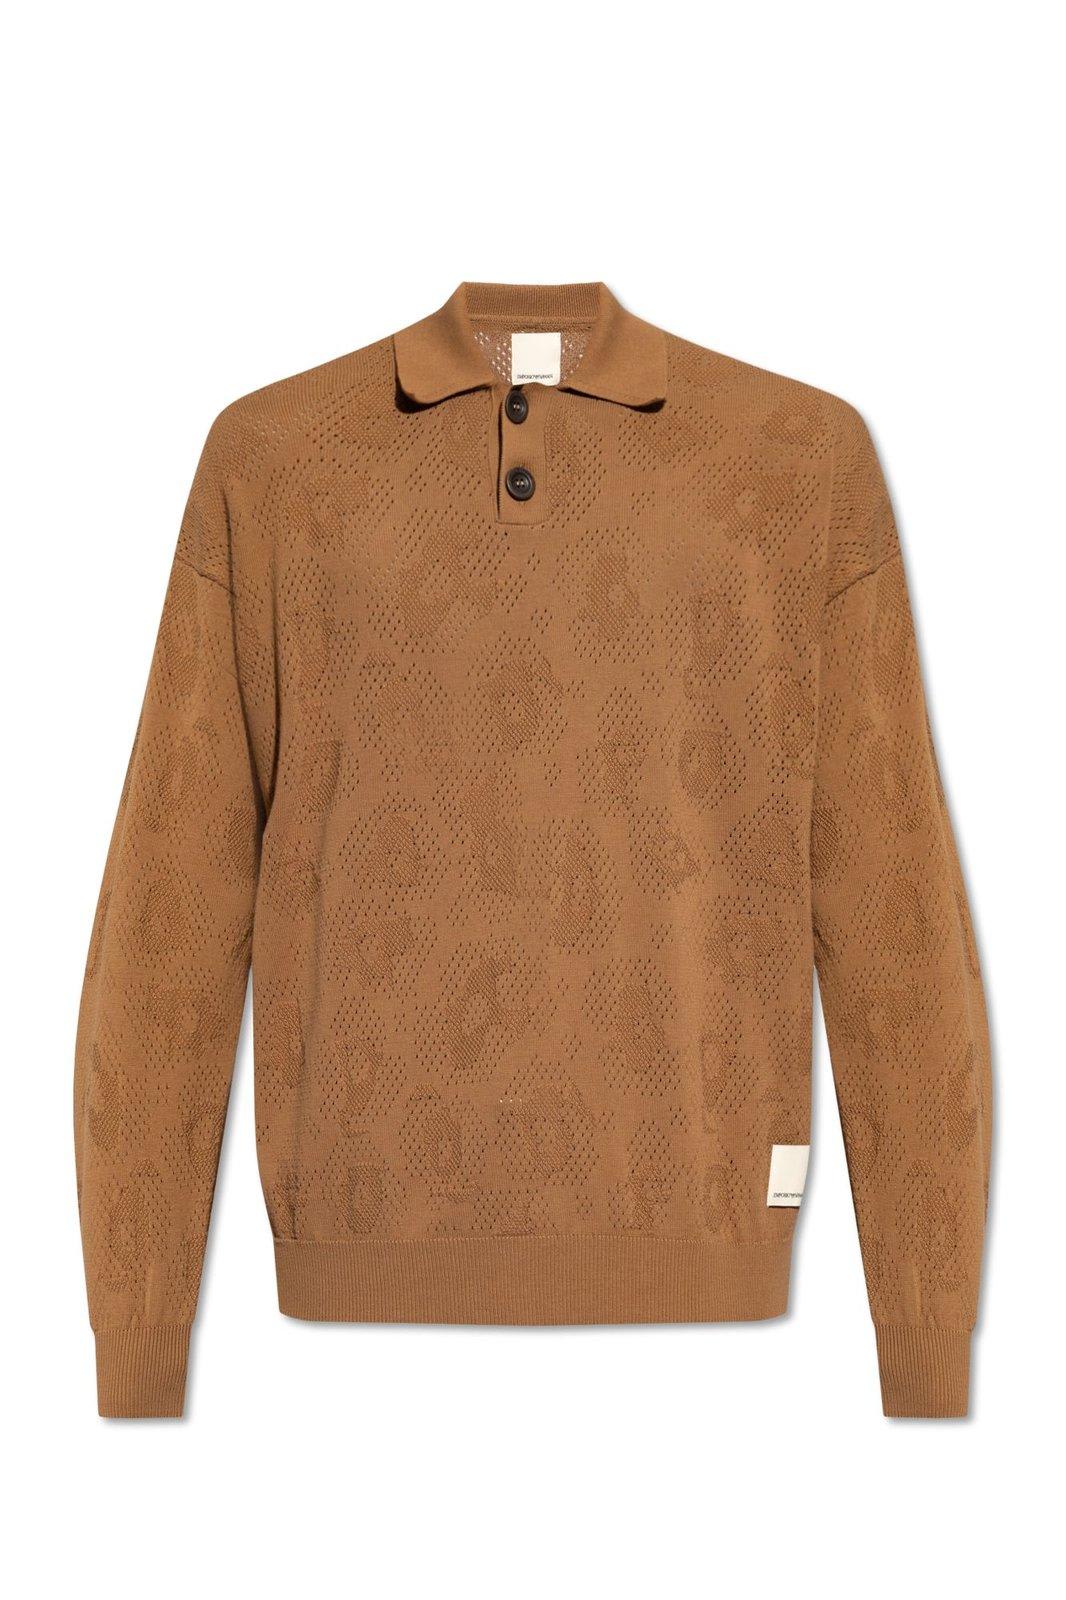 Shop Emporio Armani Sweater With Collar In Beige